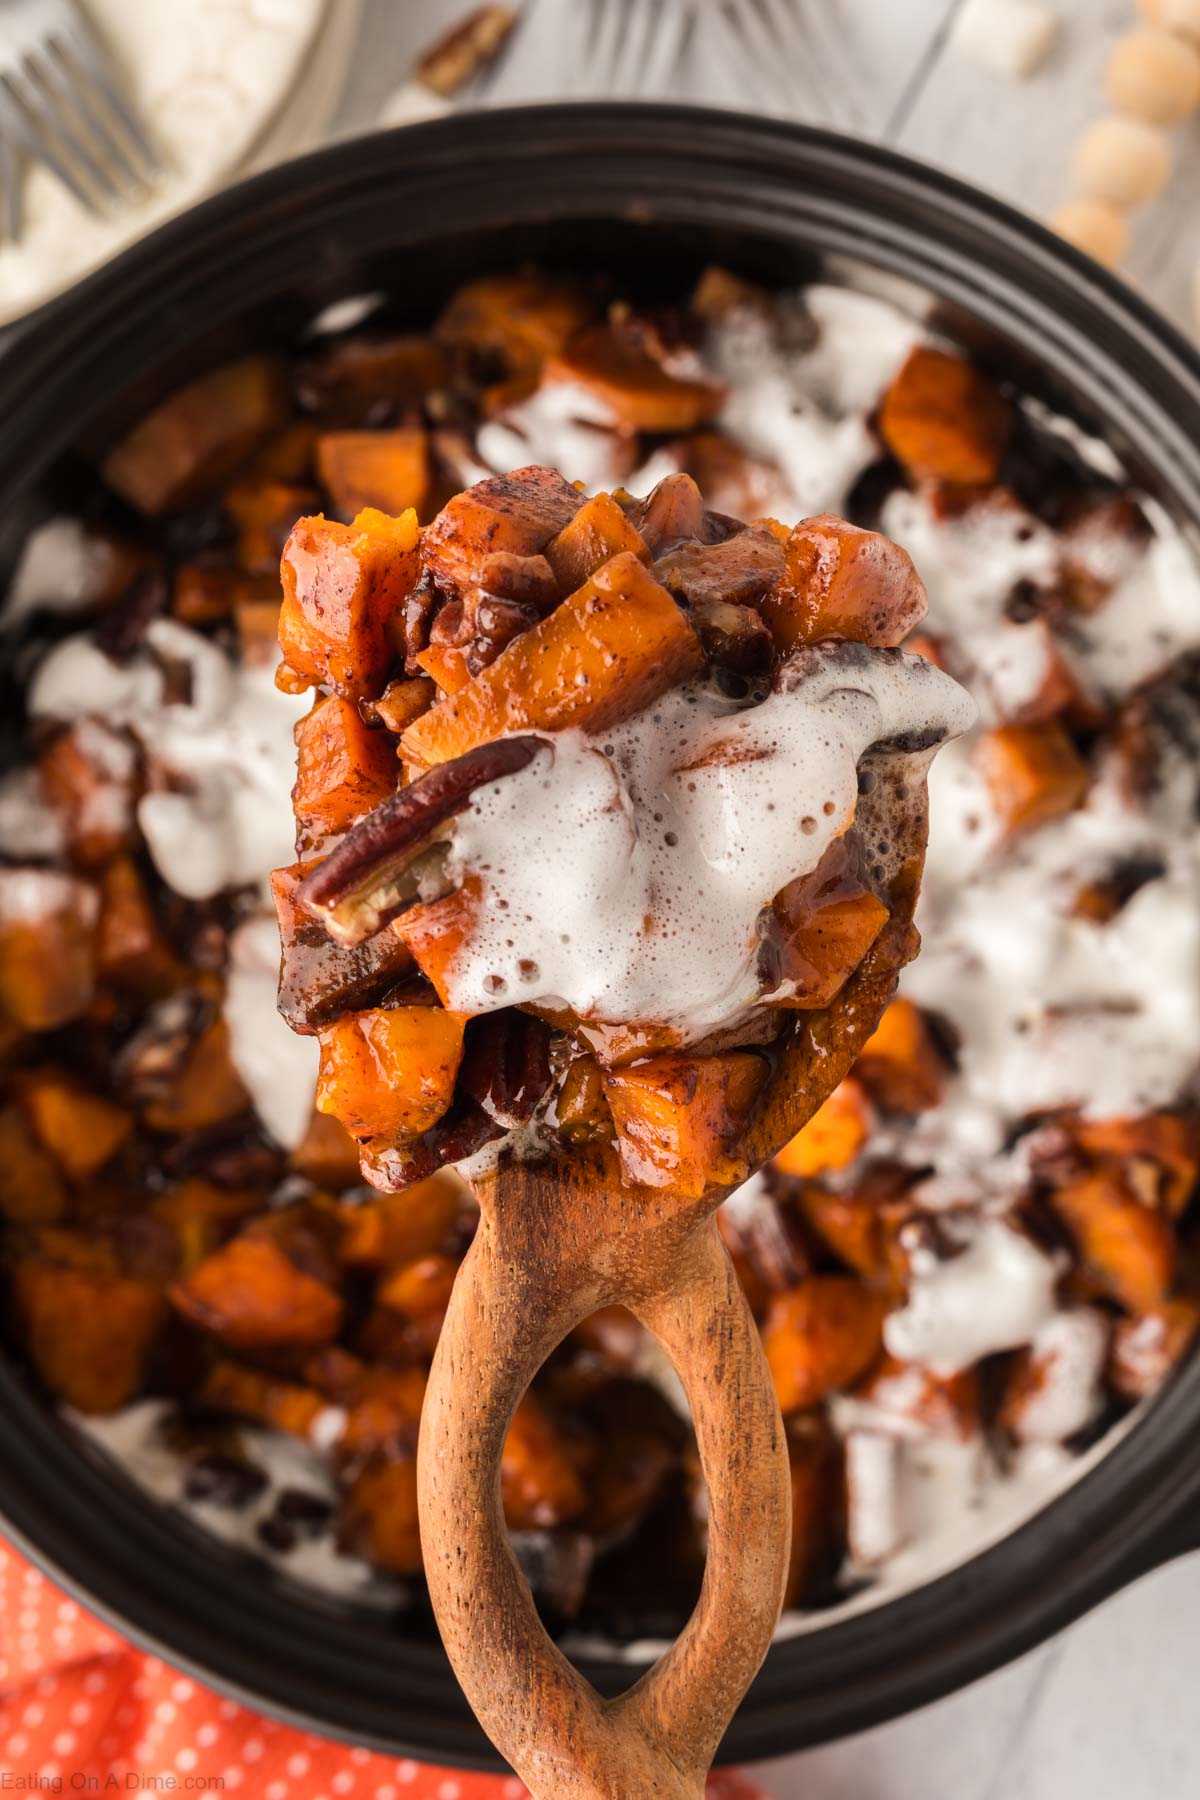 Dishing a serving with a wooden spoon from the slow cooker